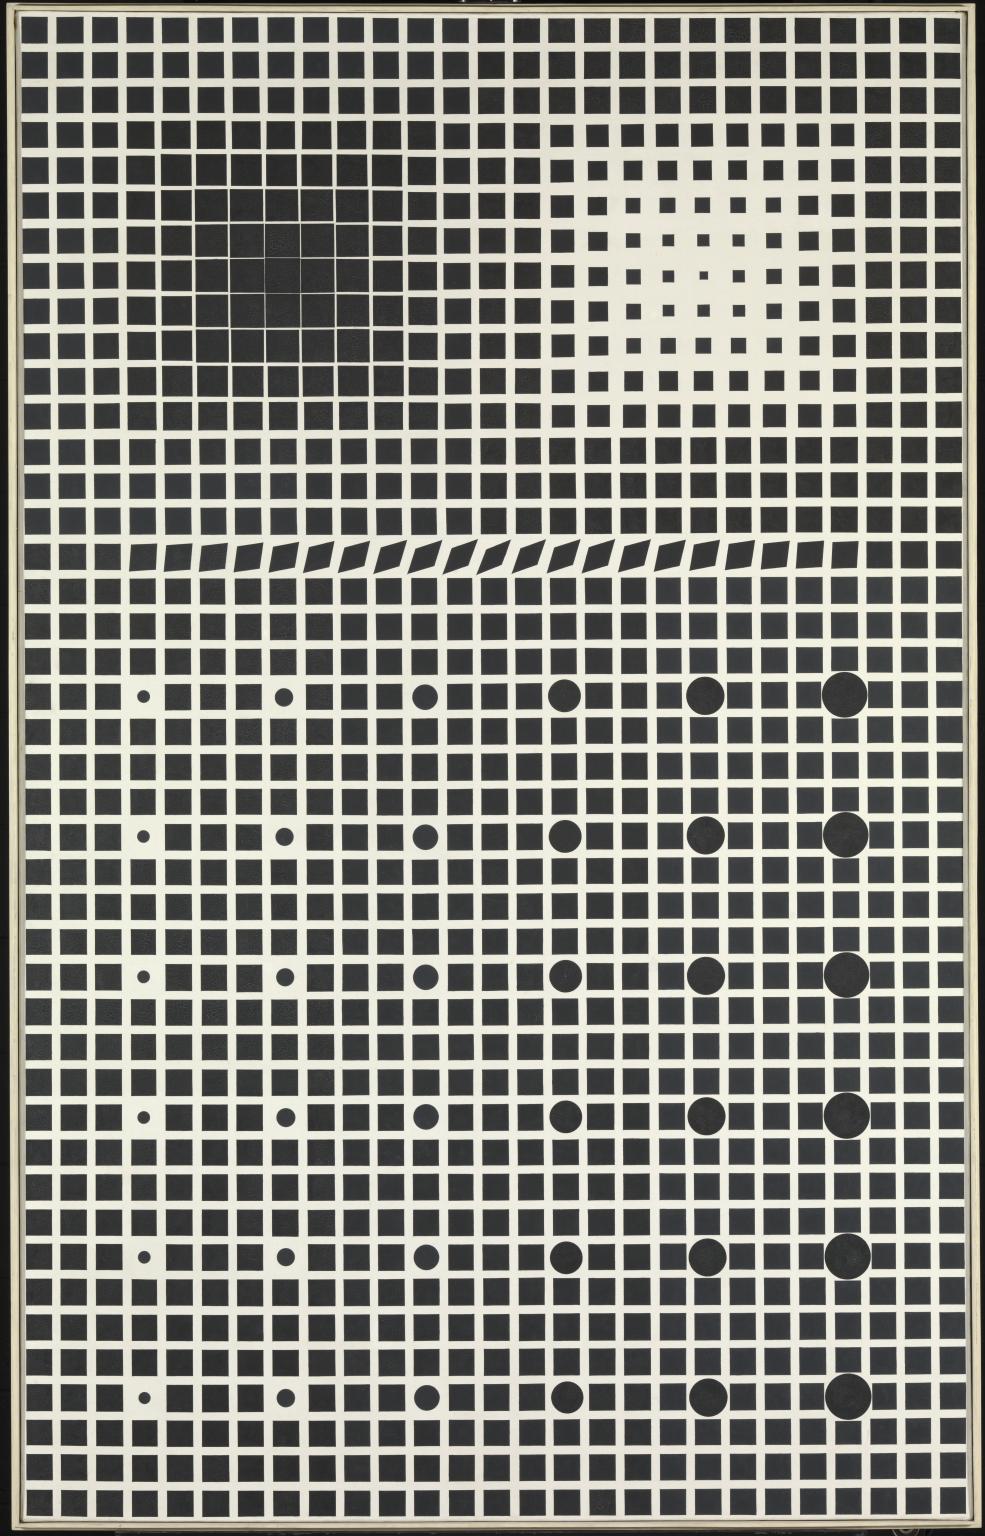 Supernovae by Victor Vasarely - 1959 - 1961 - 244 x 154 cm 